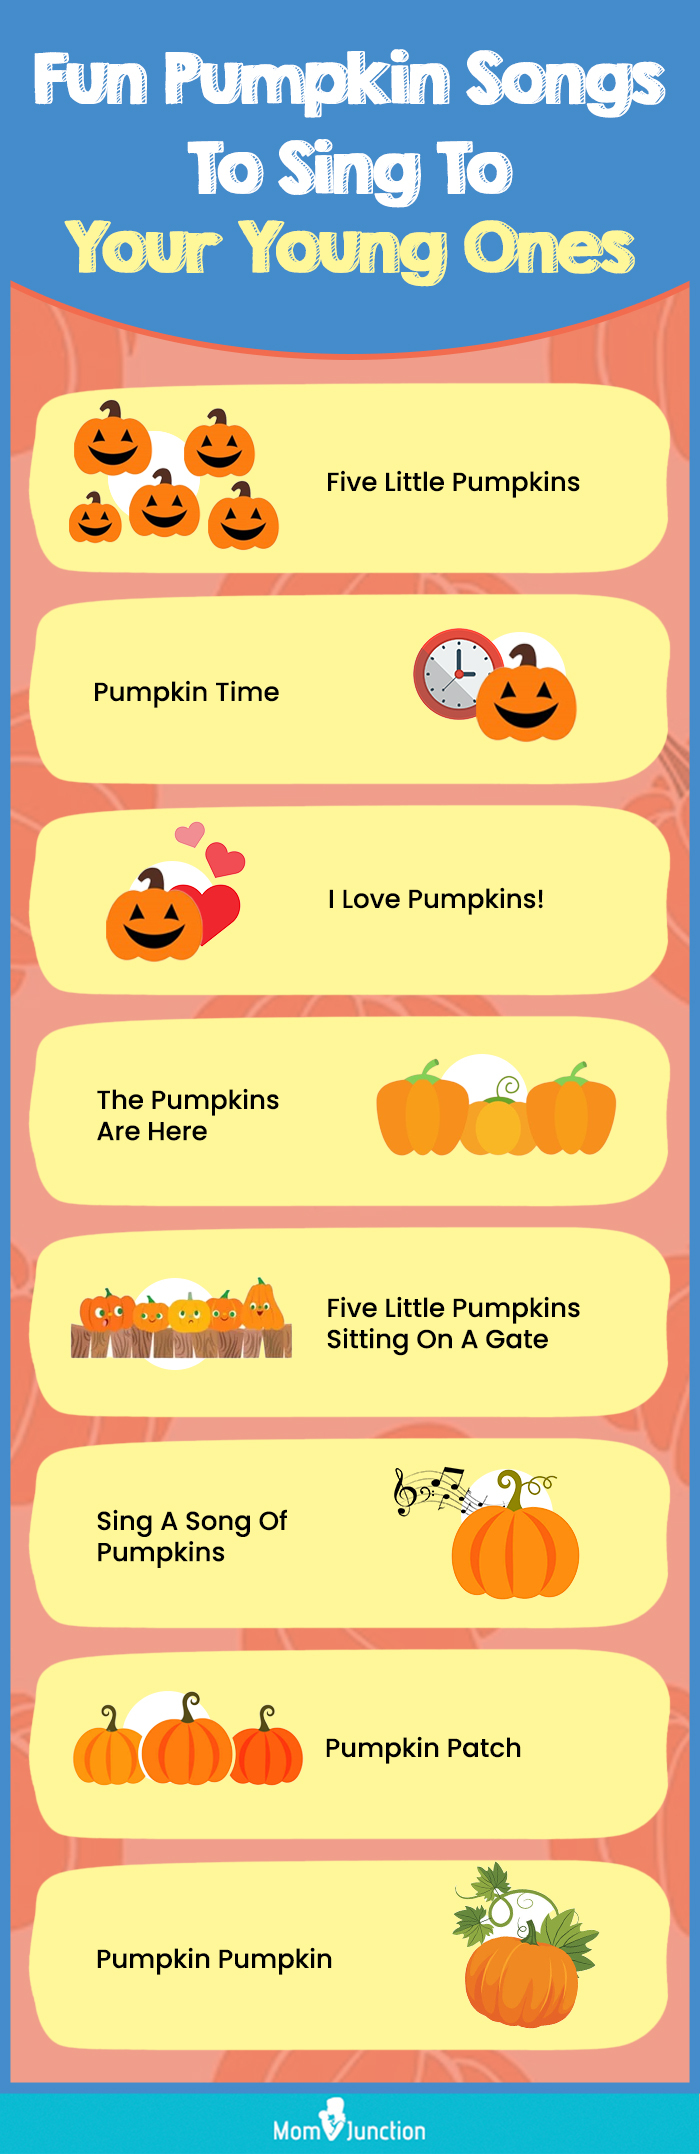 fun pumpkin songs to sing to your young ones (infographic)